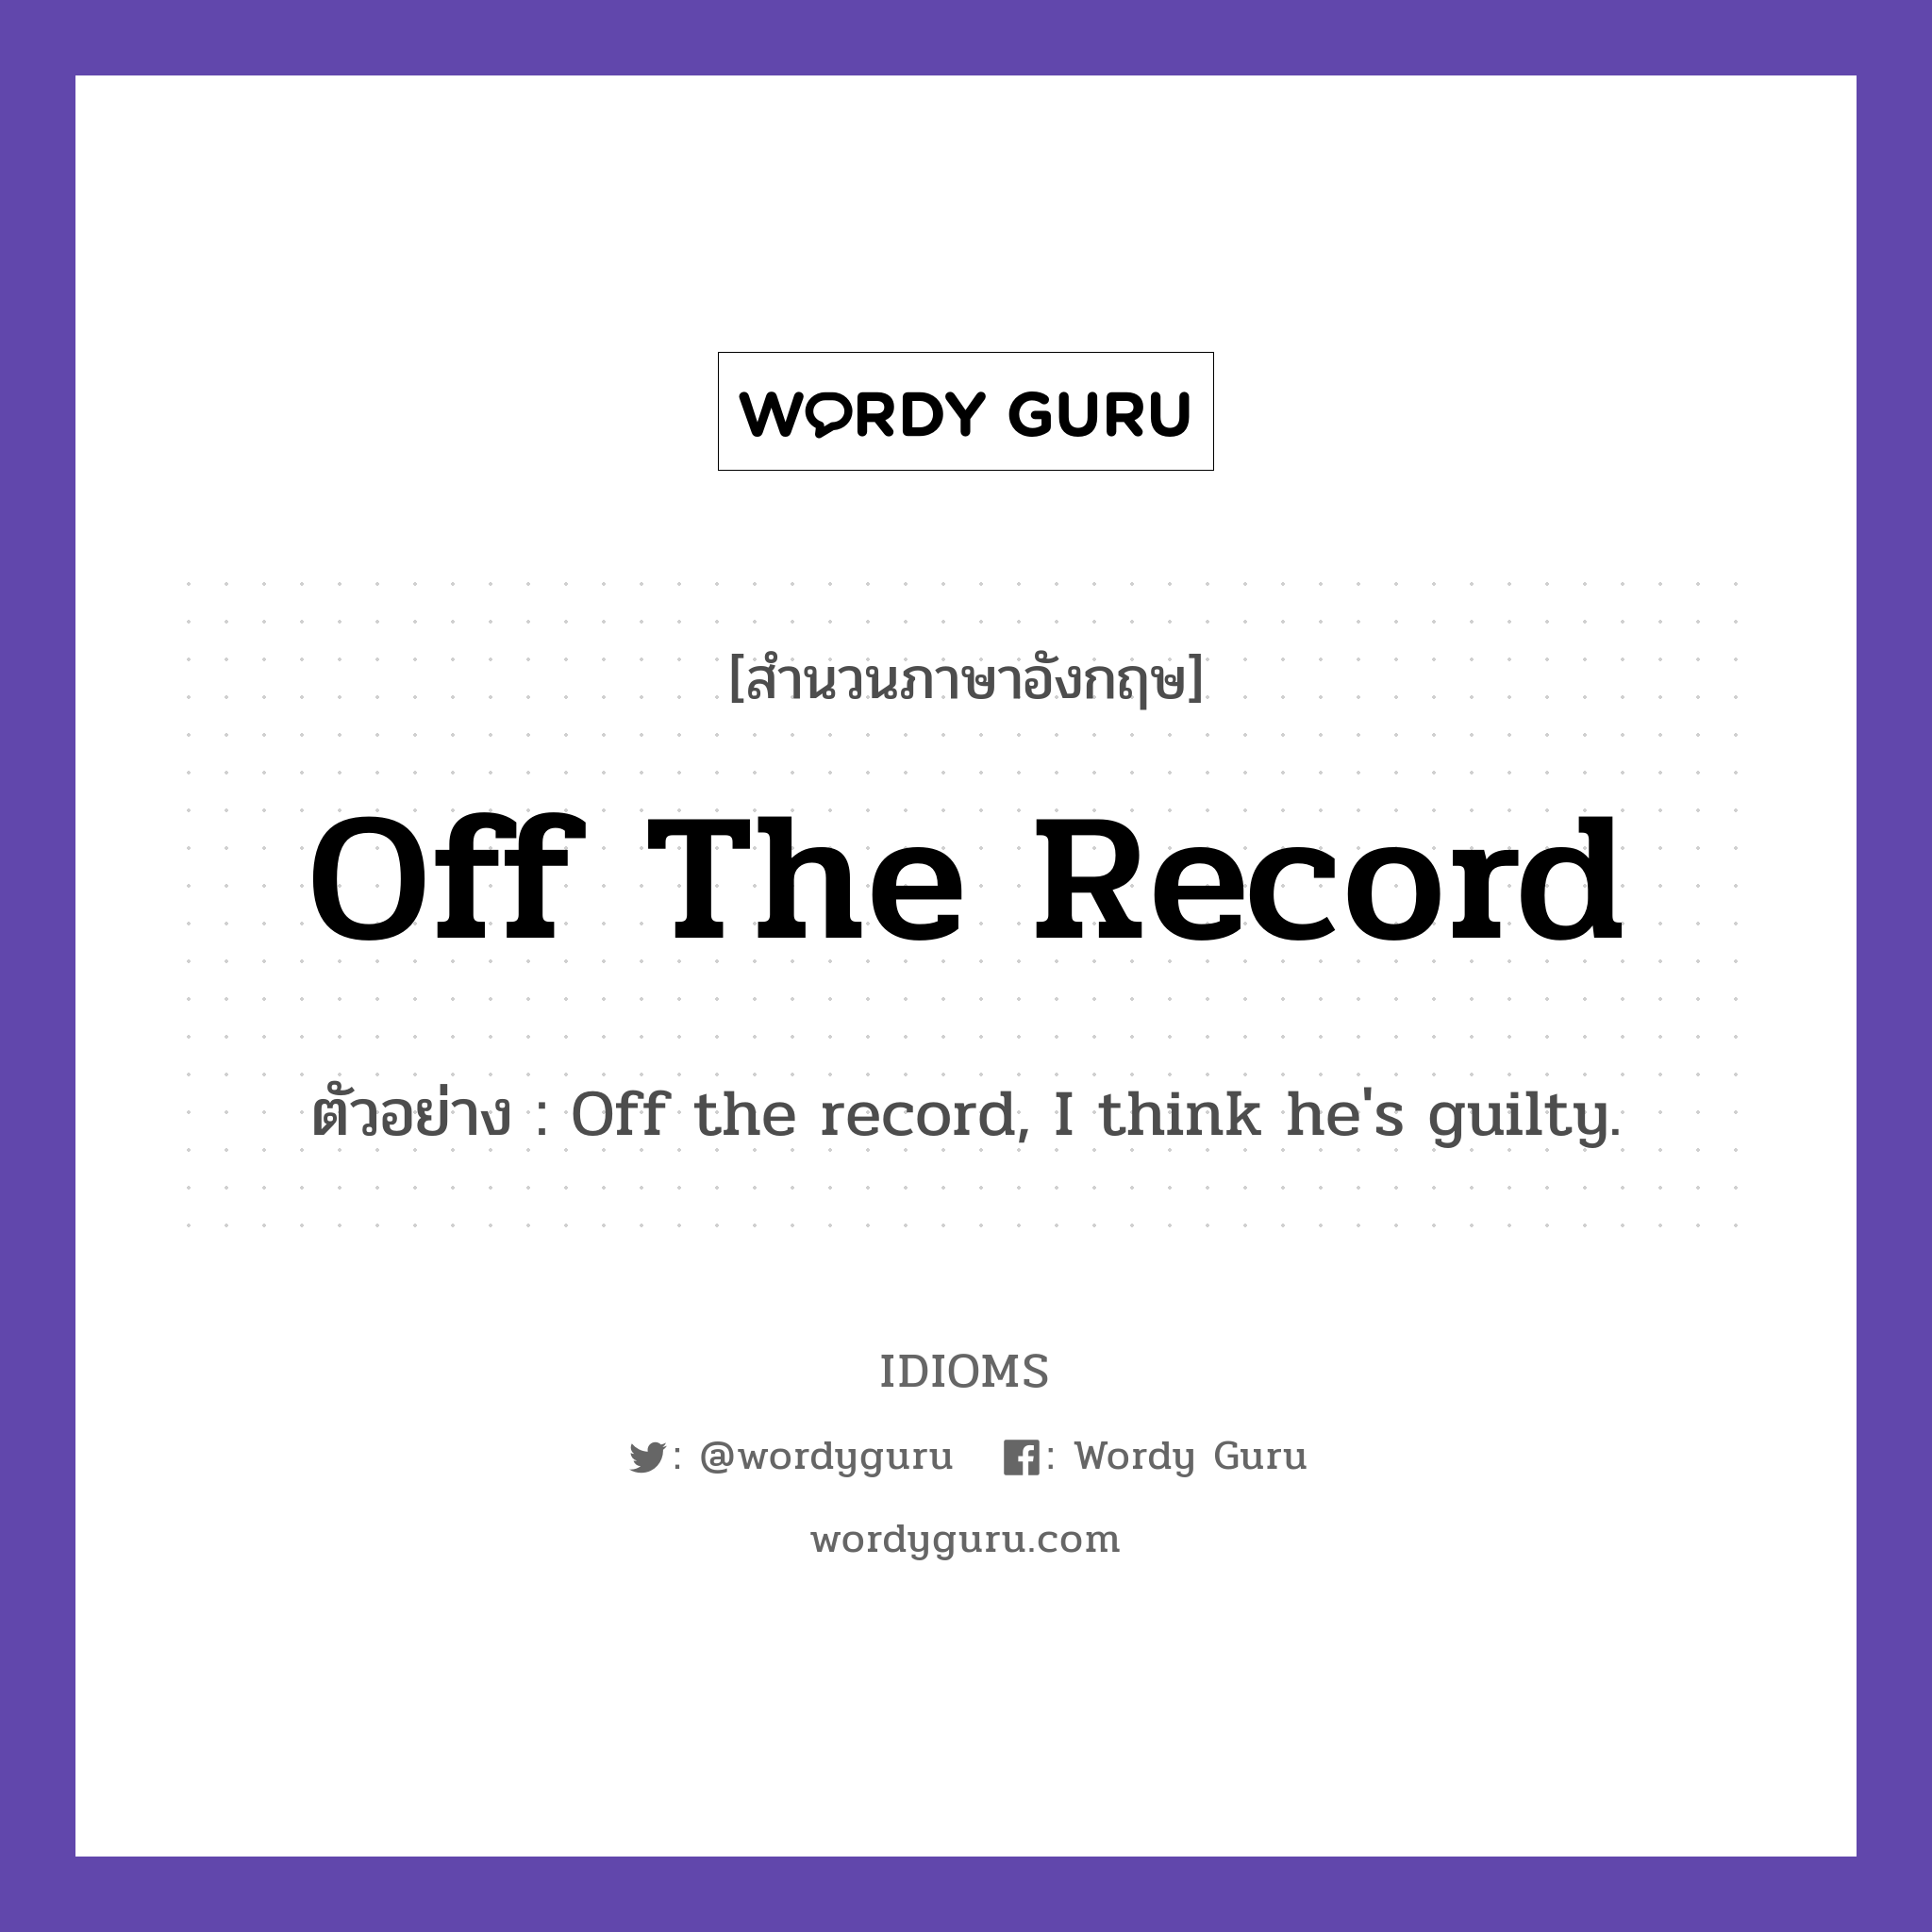 Off The Record แปลว่า?, สำนวนภาษาอังกฤษ Off The Record ตัวอย่าง Off the record, I think he's guilty.